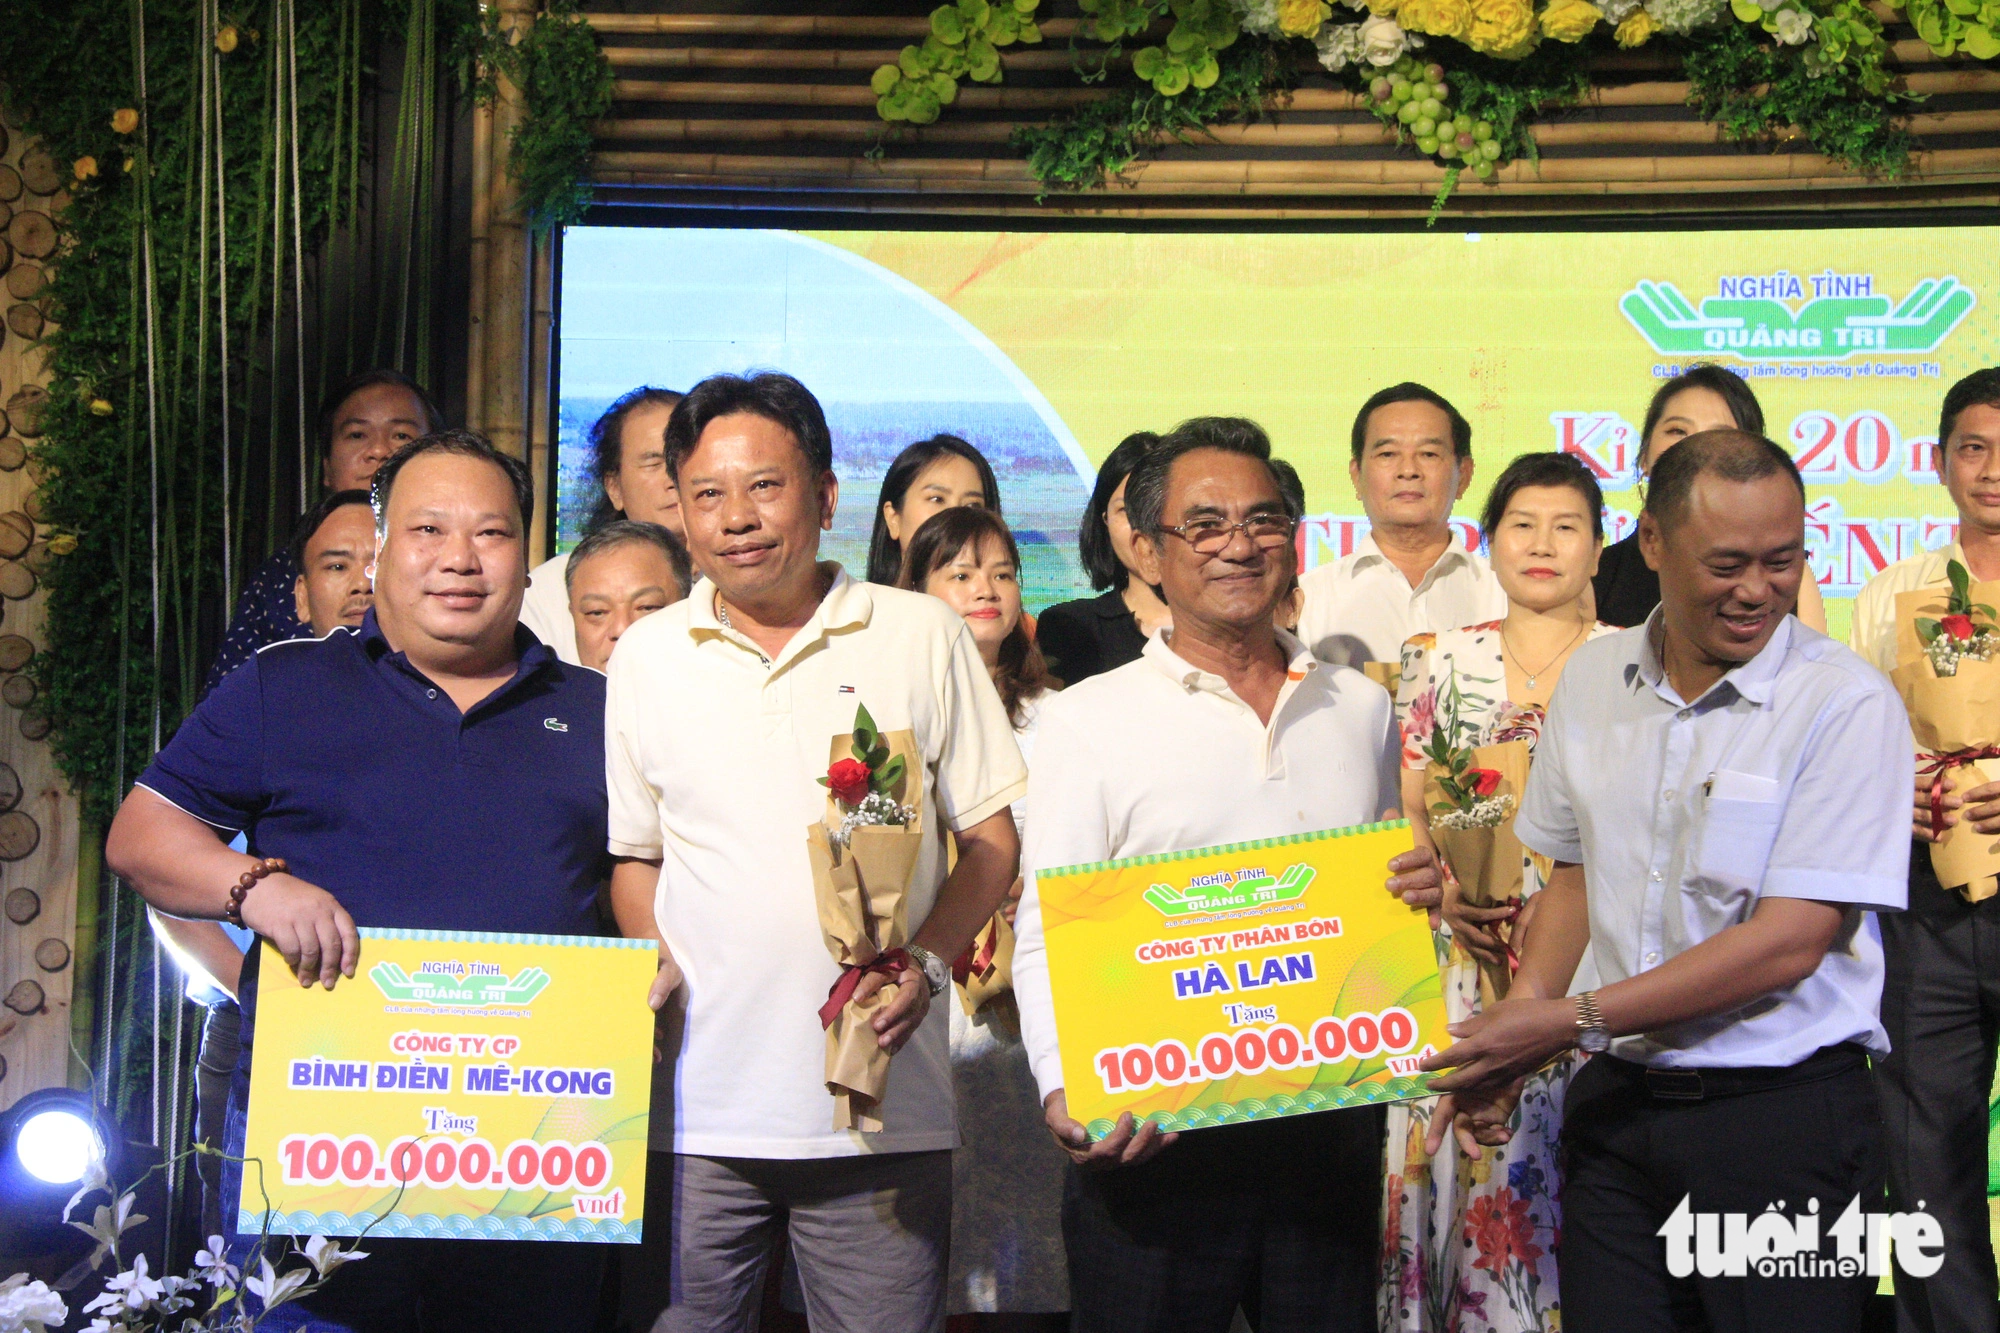 Over the past 20 years, Quang Tri Friendship Club has donated 2,566 scholarships with a total budget of more than 17 billion VND - Photo: Kong Million